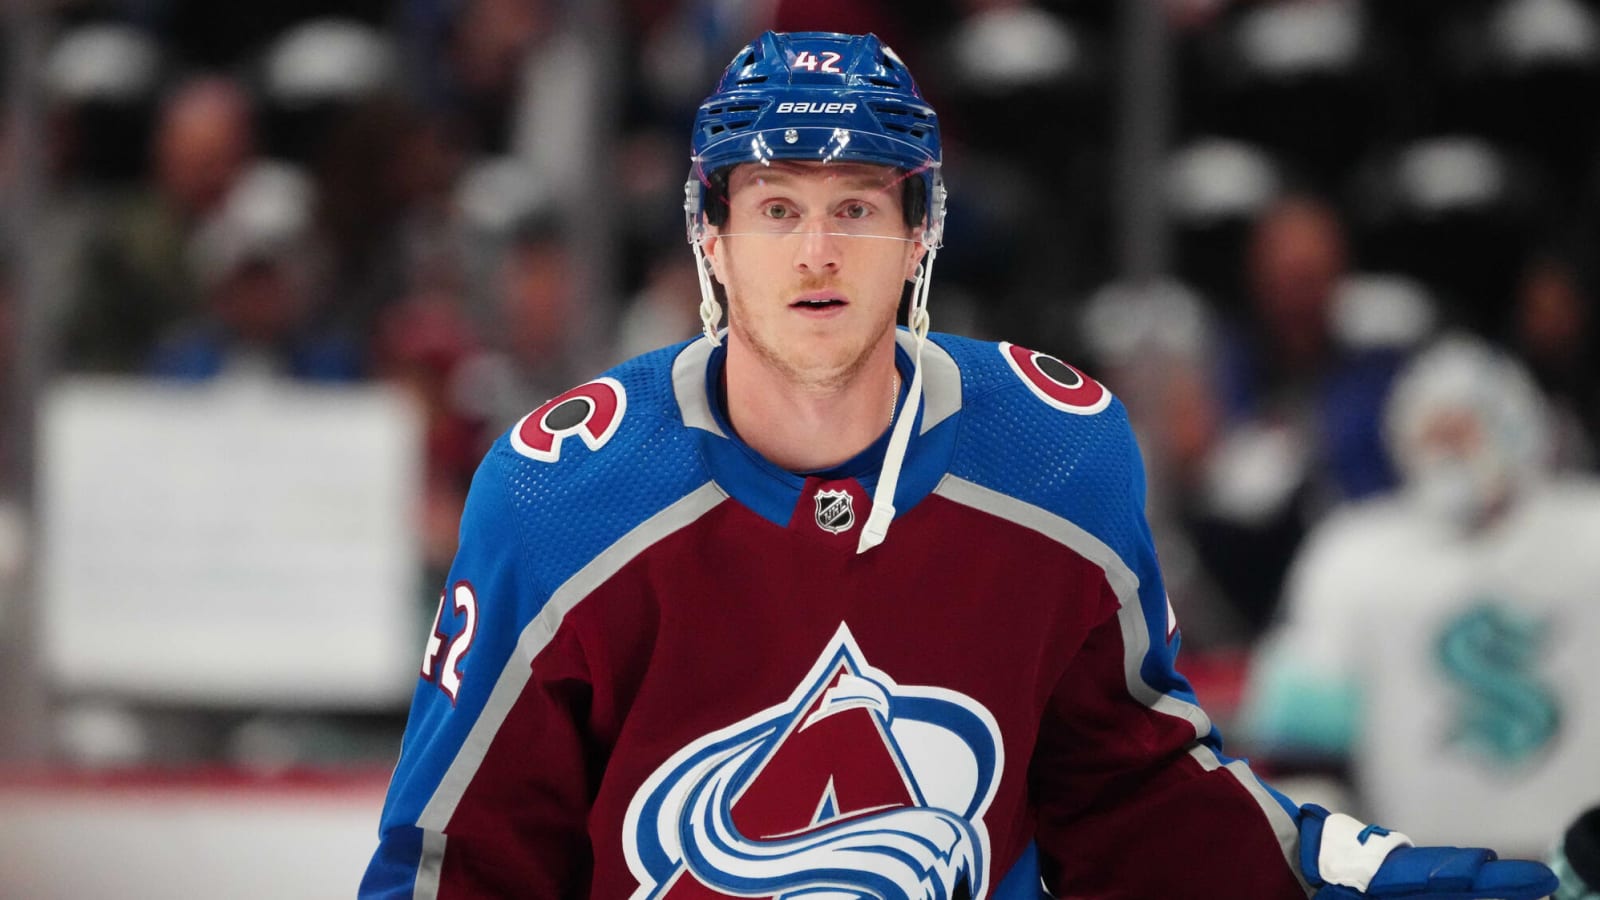 Avalanche defenseman to miss elimination game due to injury